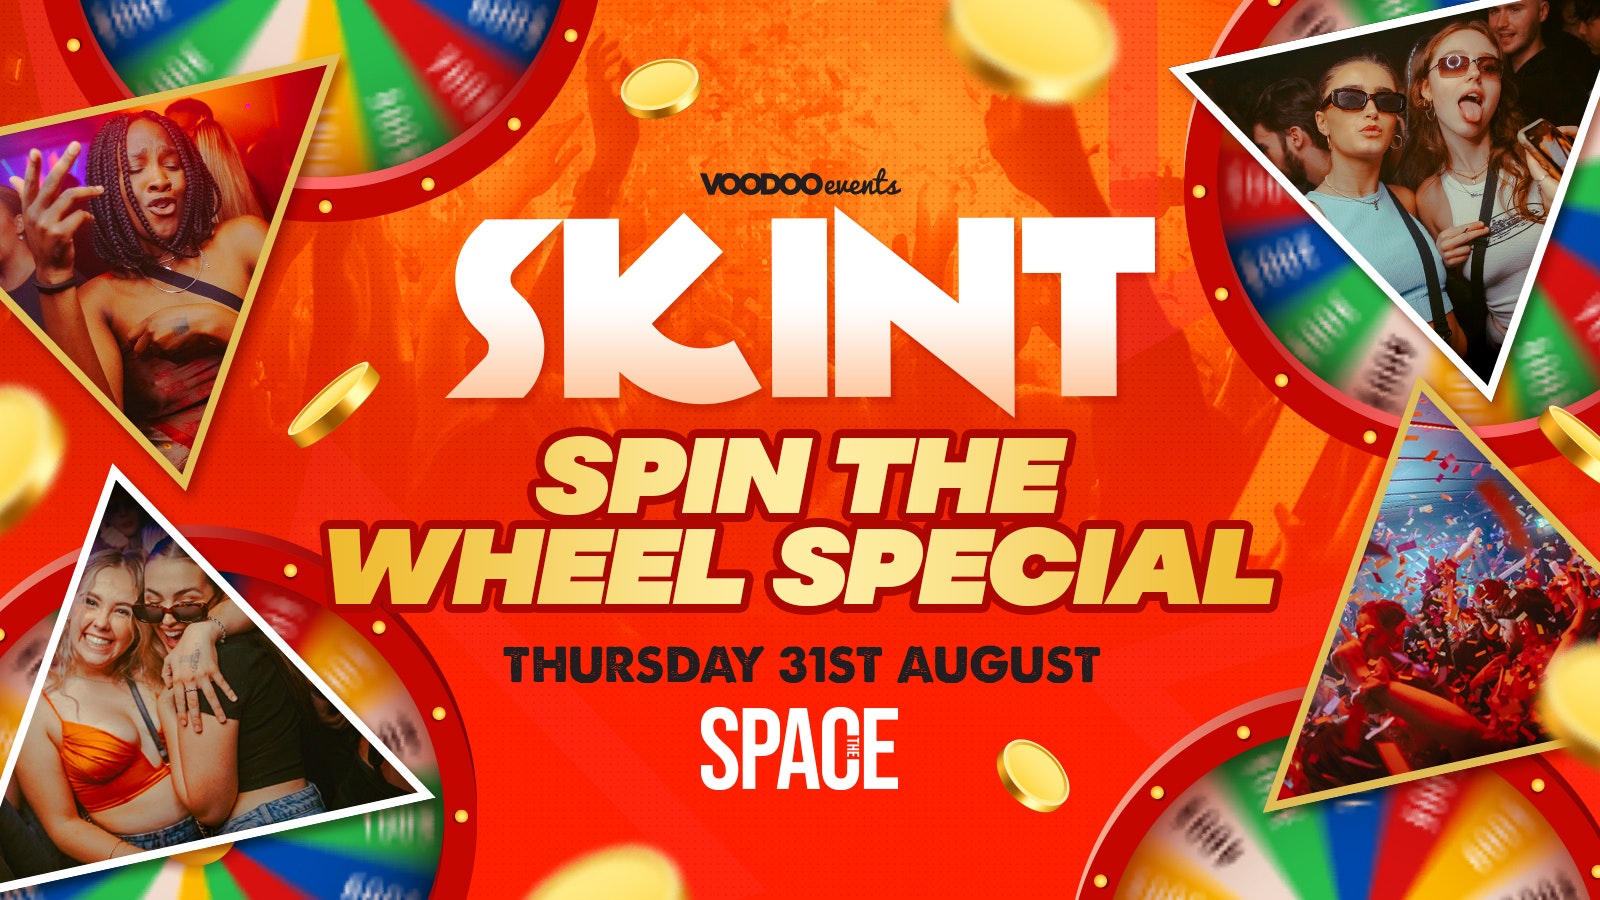 Skint Thursdays at Space – Spin the Wheel Special – 31st August